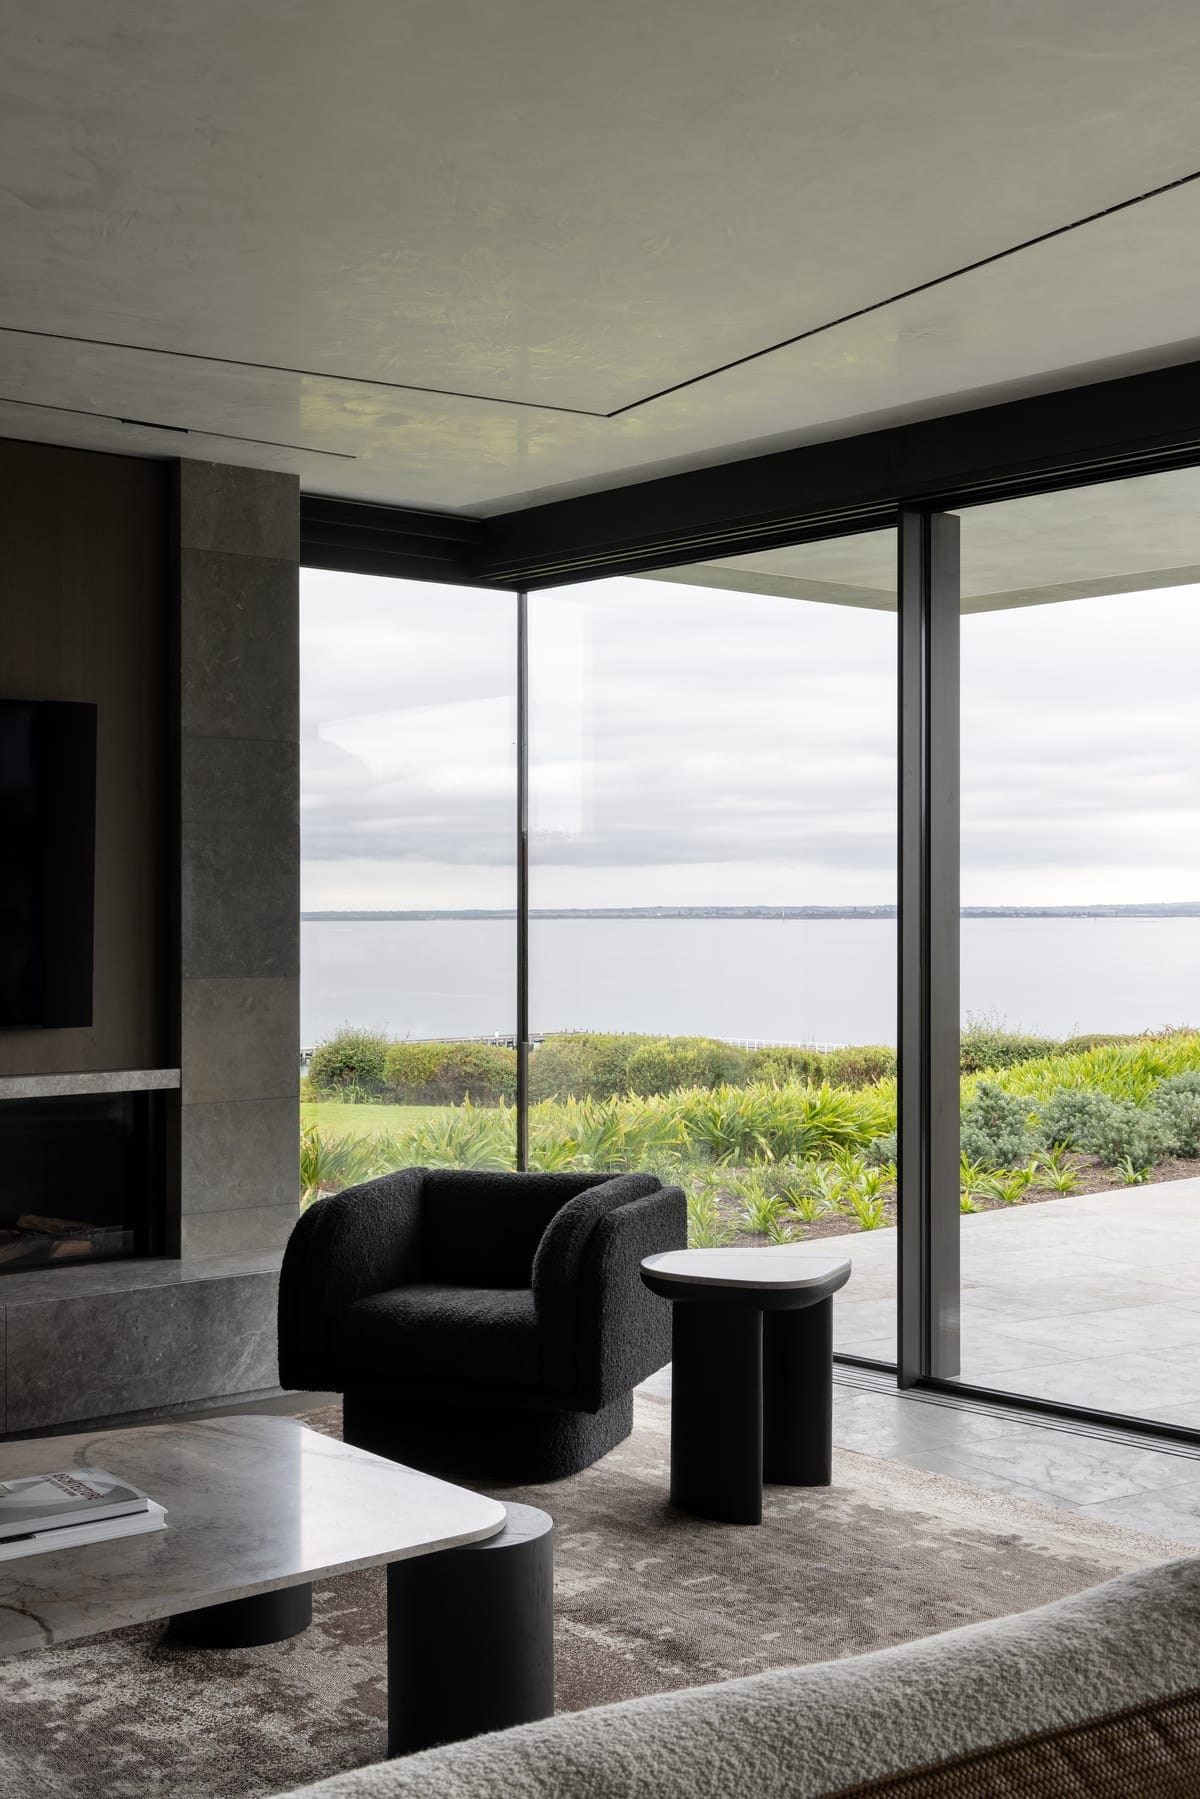 Cliff House by Finnis Architects. Photography by Timothy Kaye. Armchair in front of window, overlooking ocean. 